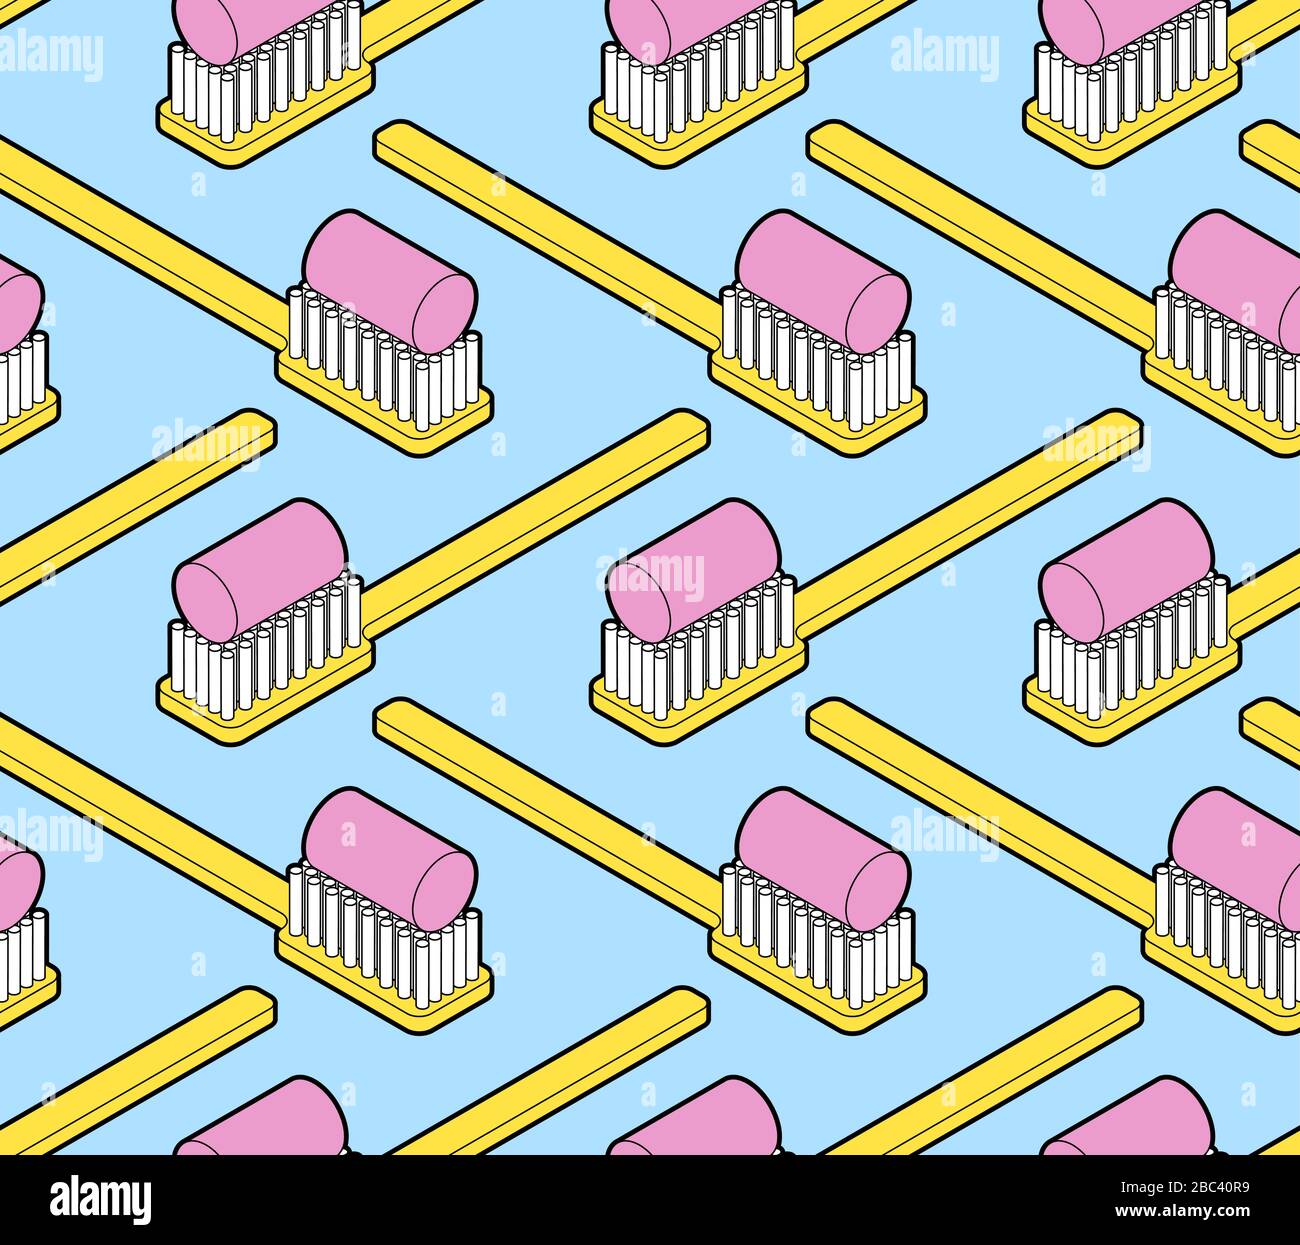 Toothbrush Isometric pattern seamless. toothbrush head vector background Stock Vector